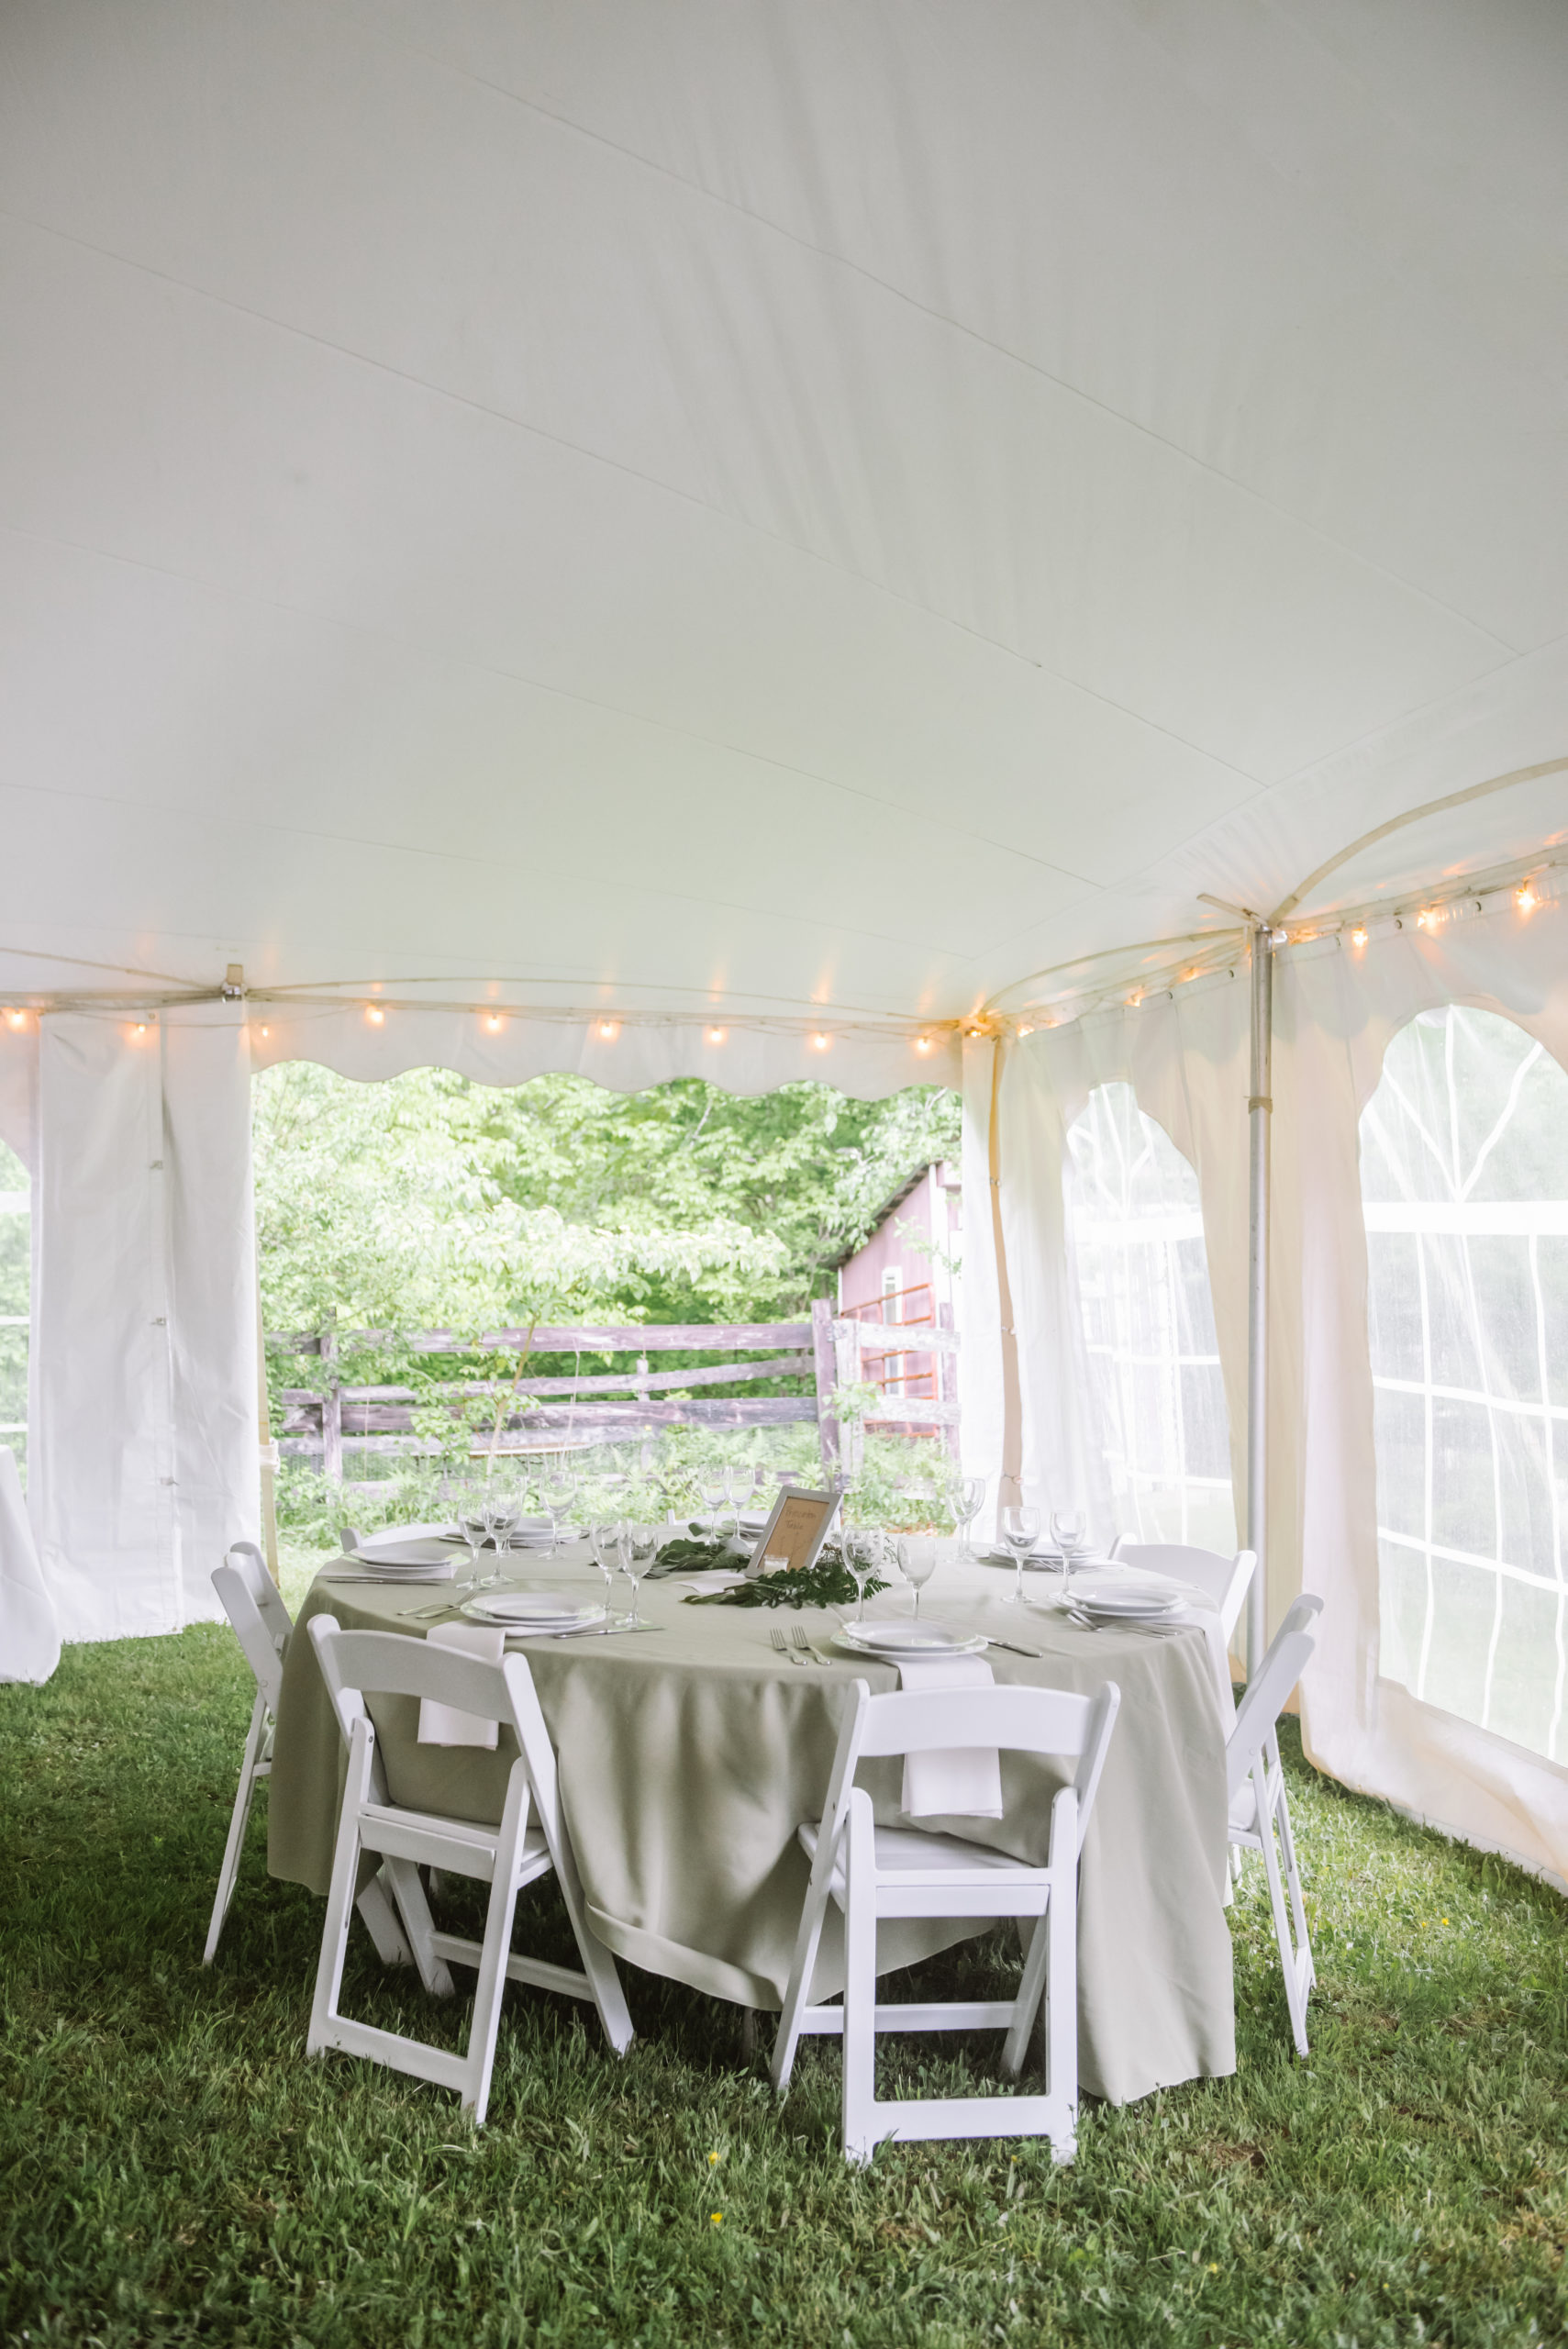 Fully set table in a white reception tent. There is a sage tablecloth, white napkins, and white chairs. The centerpiece is a silver framed brown sign with a wreath of greenery surrounding it.